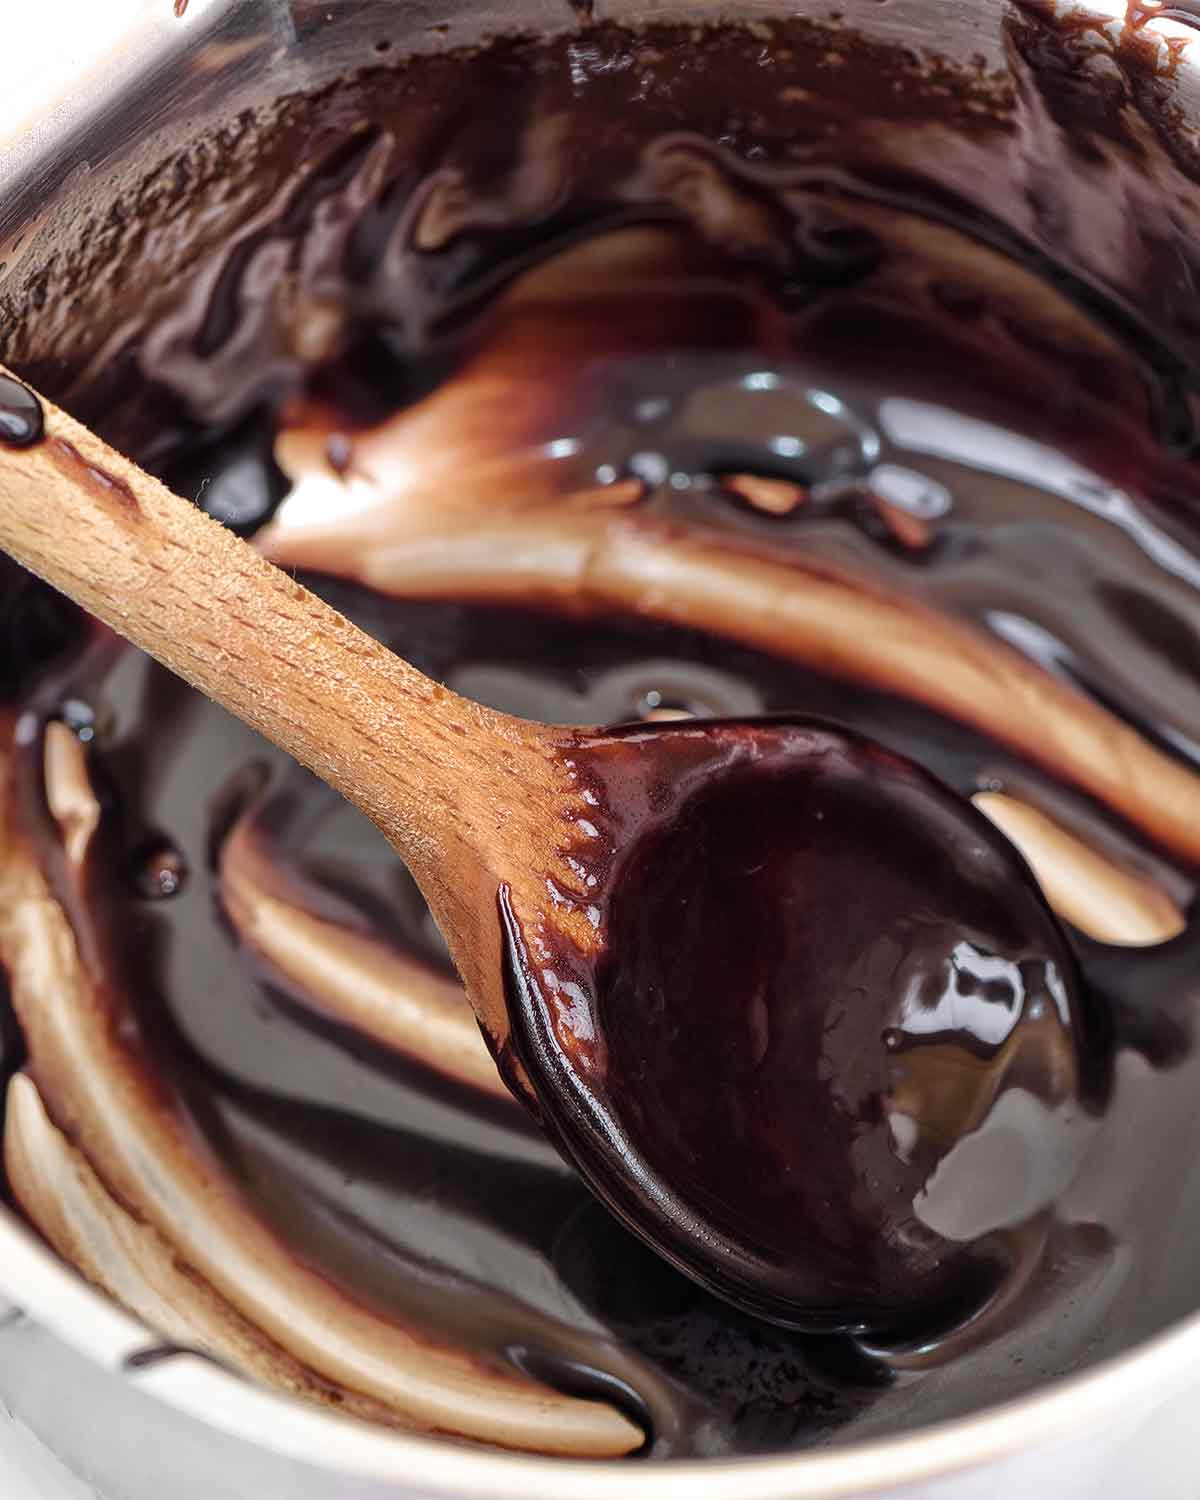 An almost empty pot with traces of hot fudge sauce and a wooden spoon resting inside.